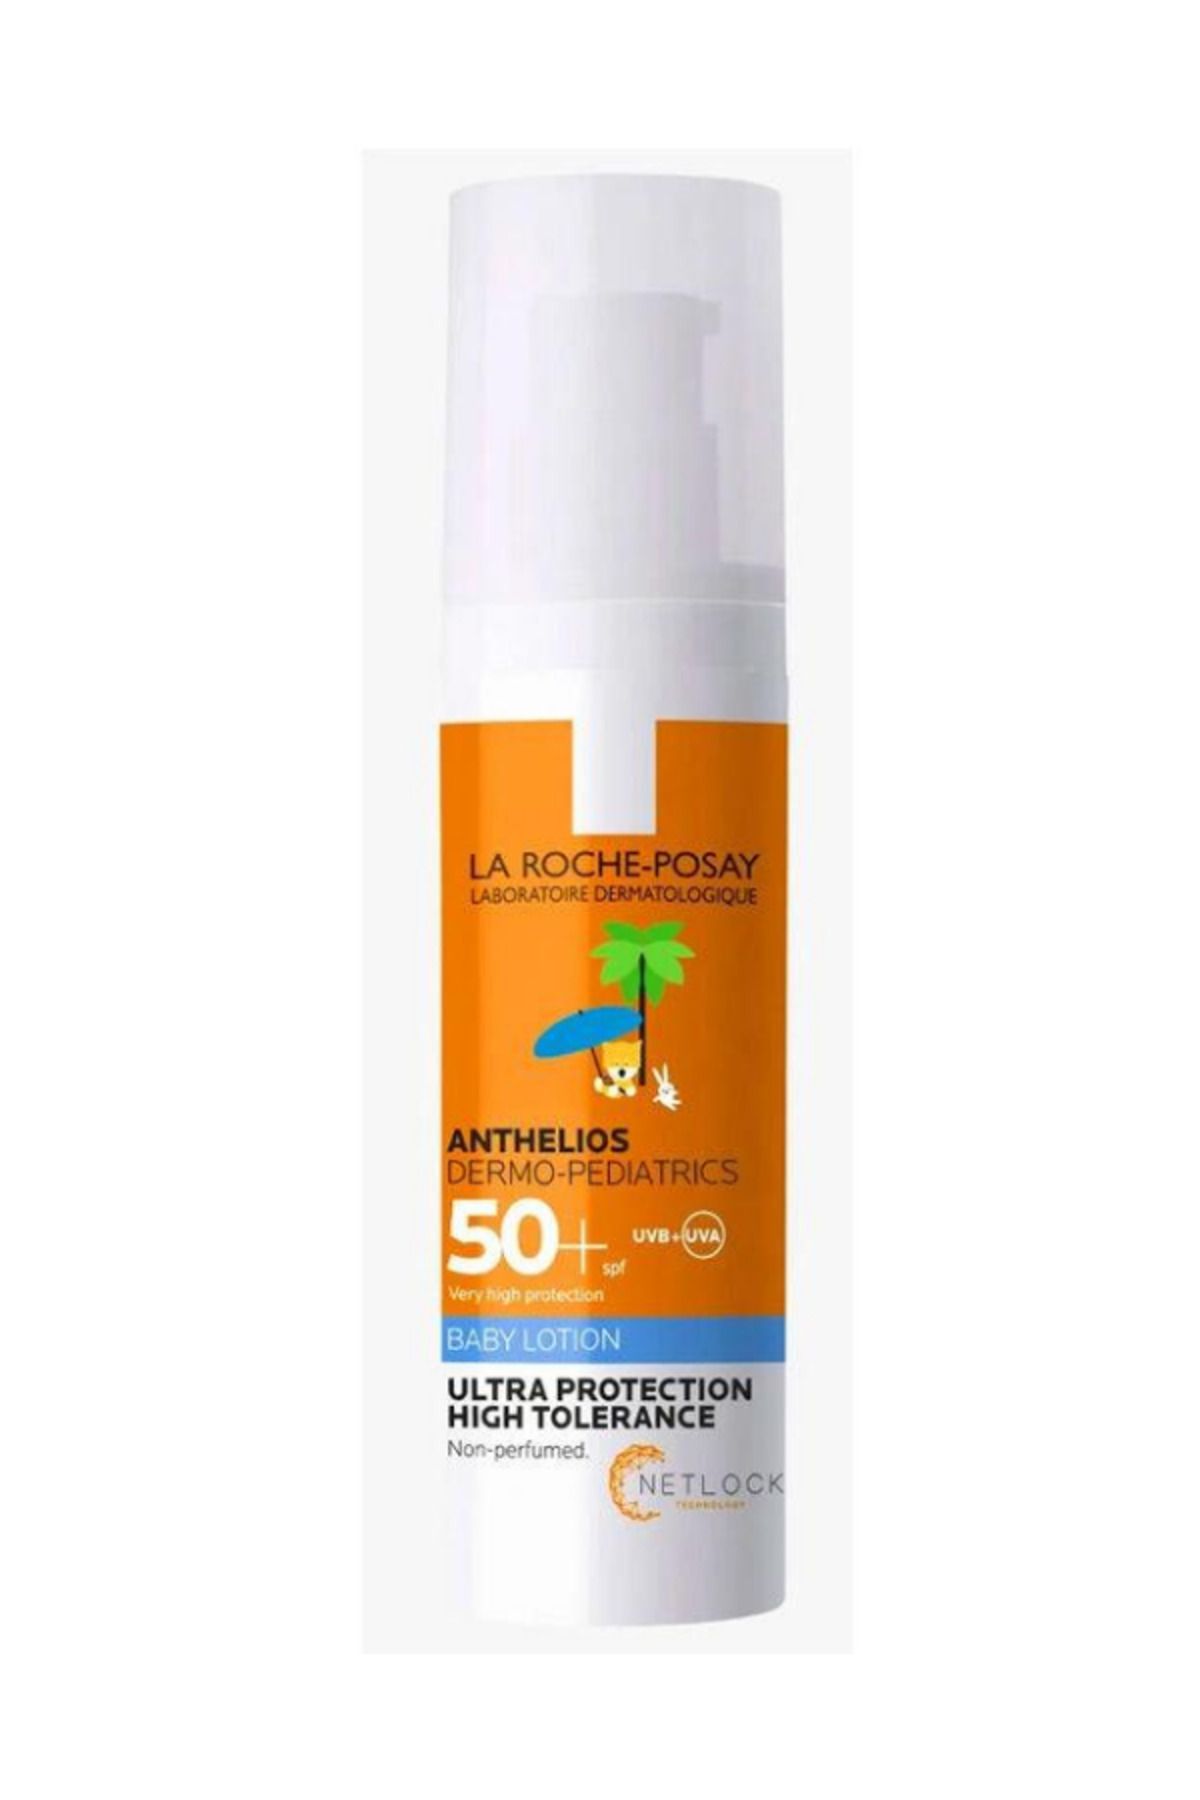 La Roche Posay HIGHLY PROTECTIVE SUN LOTION SPF50 FOR SENSITIVE BABY SKIN 50 ML